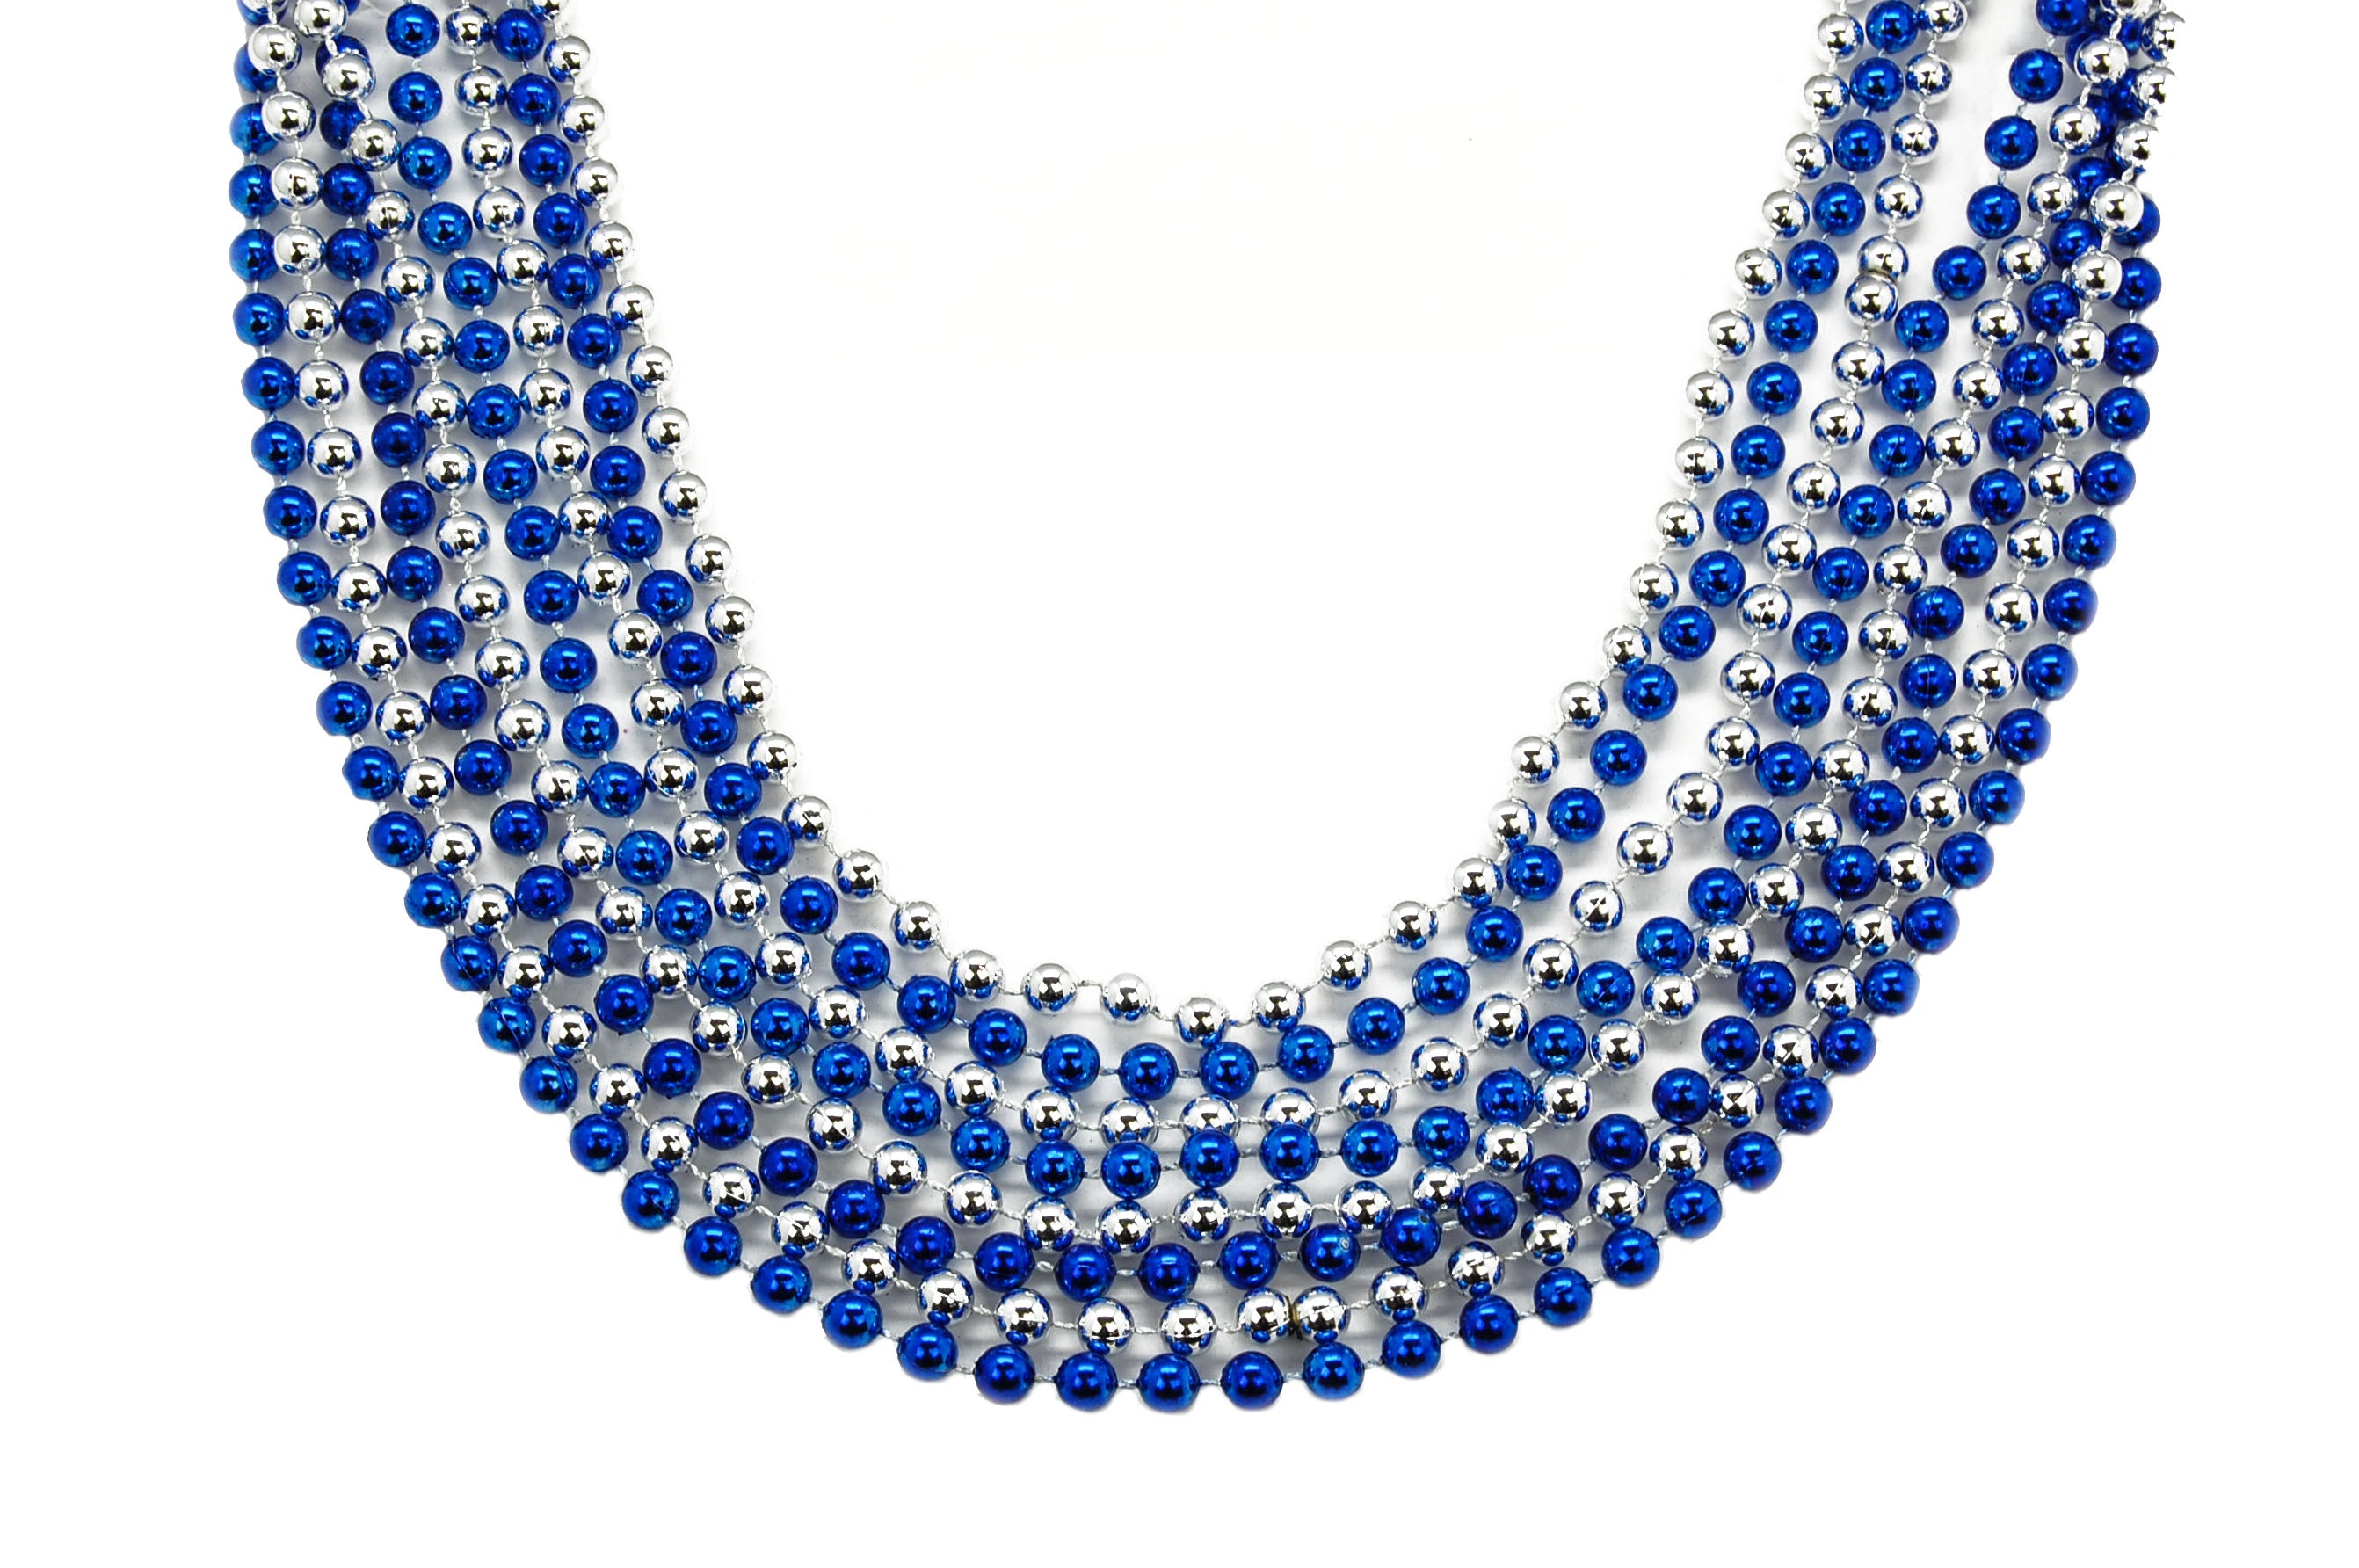 33 7mm Round Blue and Silver Beads